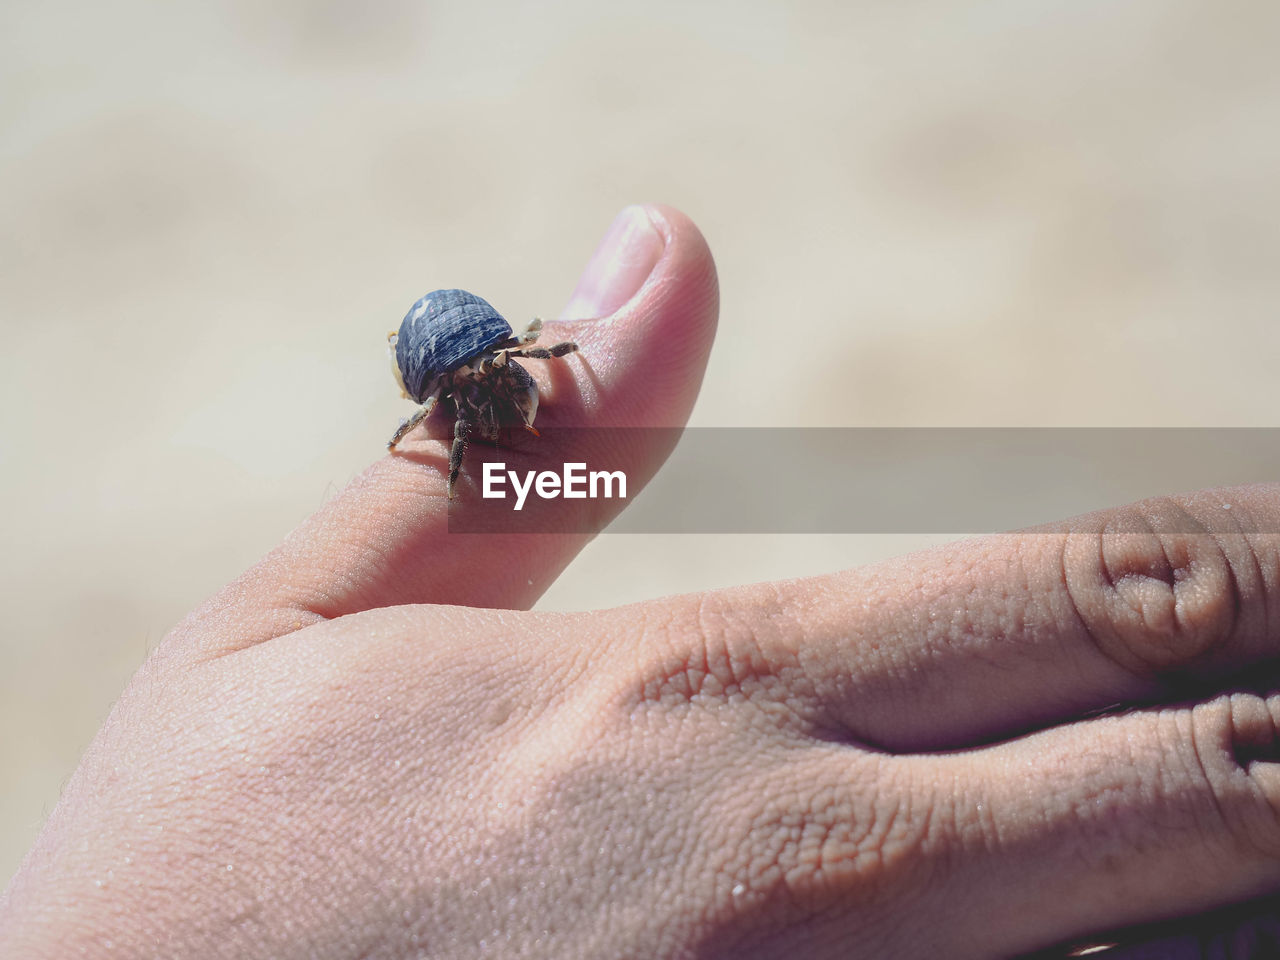 Cropped hand of person holding crab at beach during sunny day